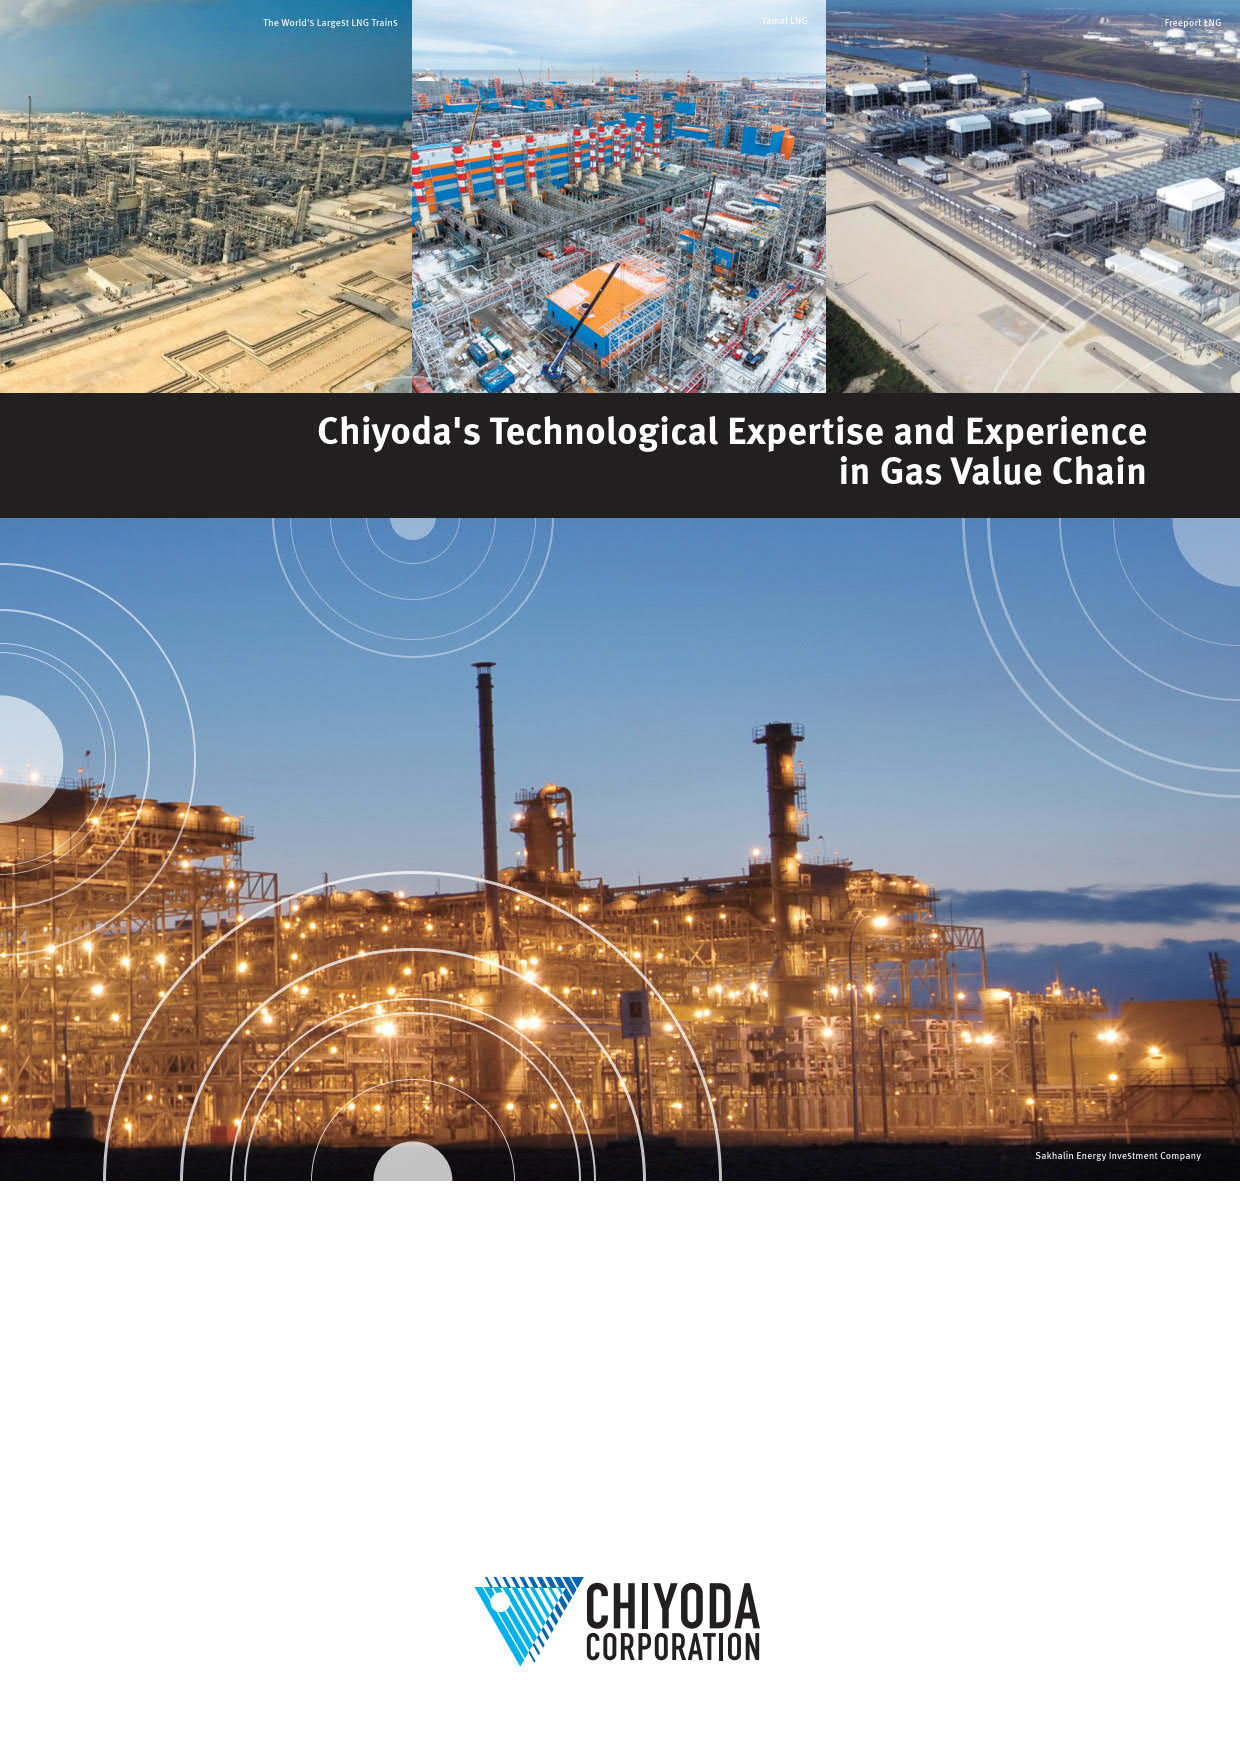 Chiyoda's Technological Expertise and Experience in Gas Value Chain